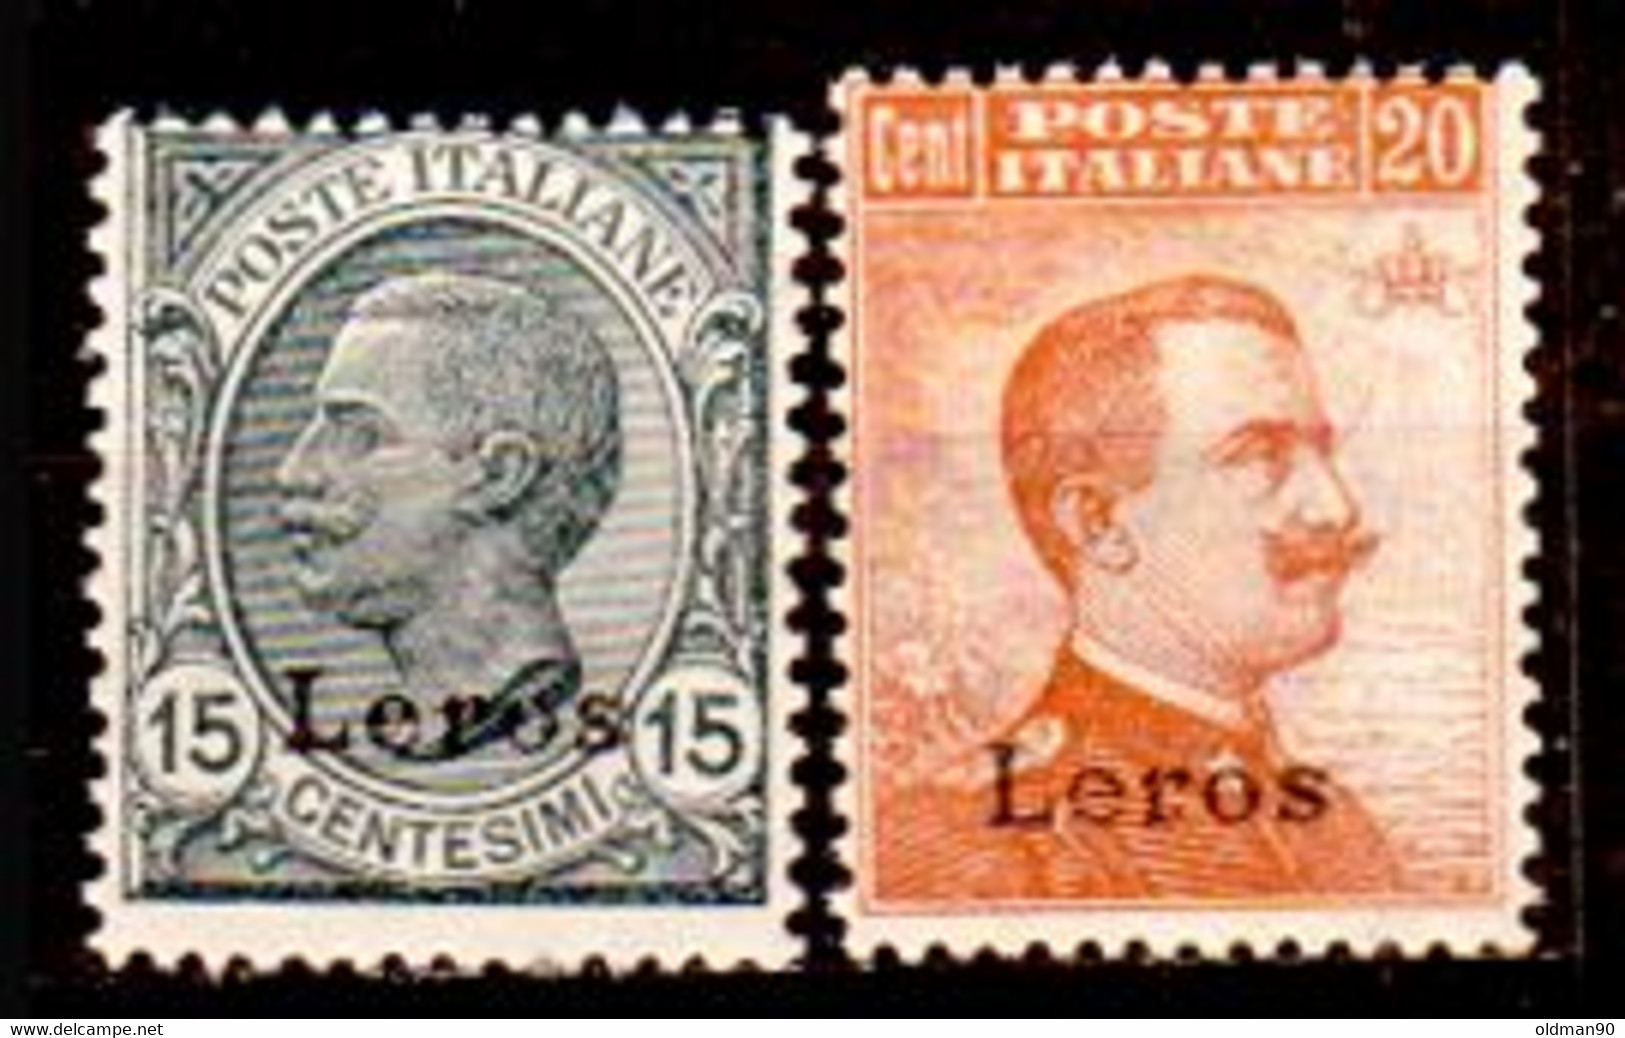 Egeo-OS-292- Lero: Original Stamp And Overprint 1921-22 (++) MNH - Quality In Your Opinion. - Egée (Coo)